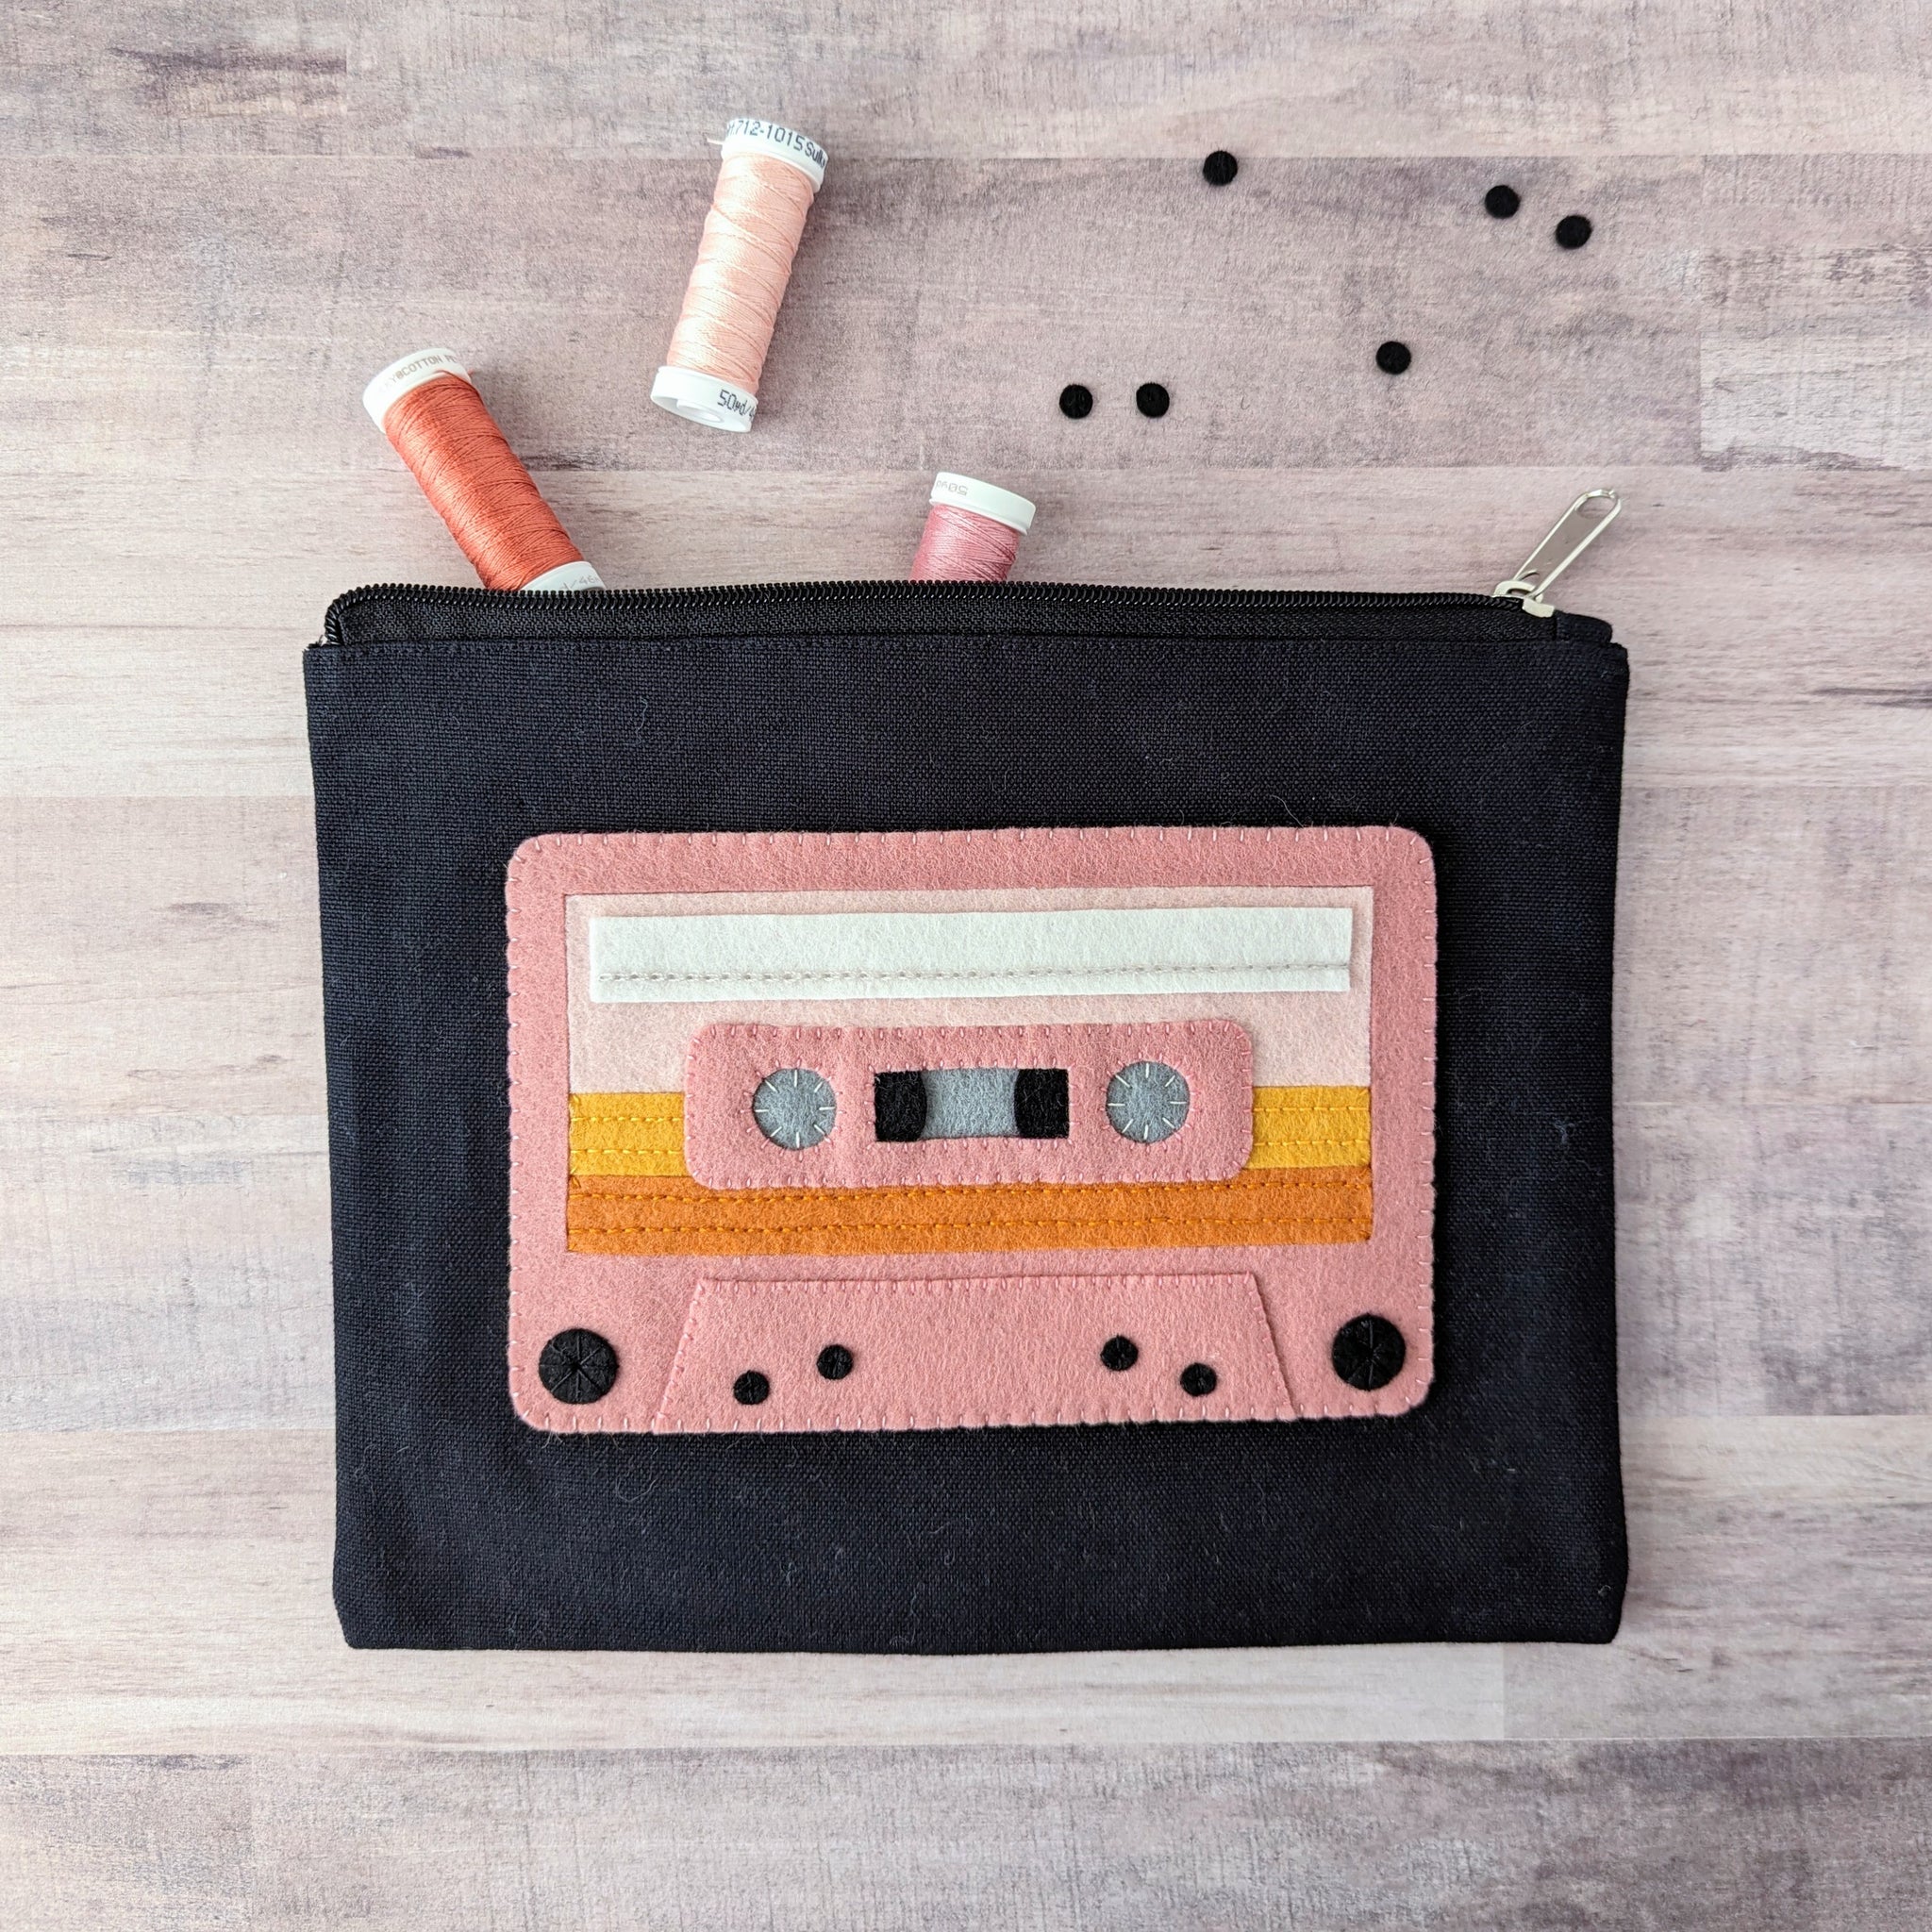 Cassette added to pouch